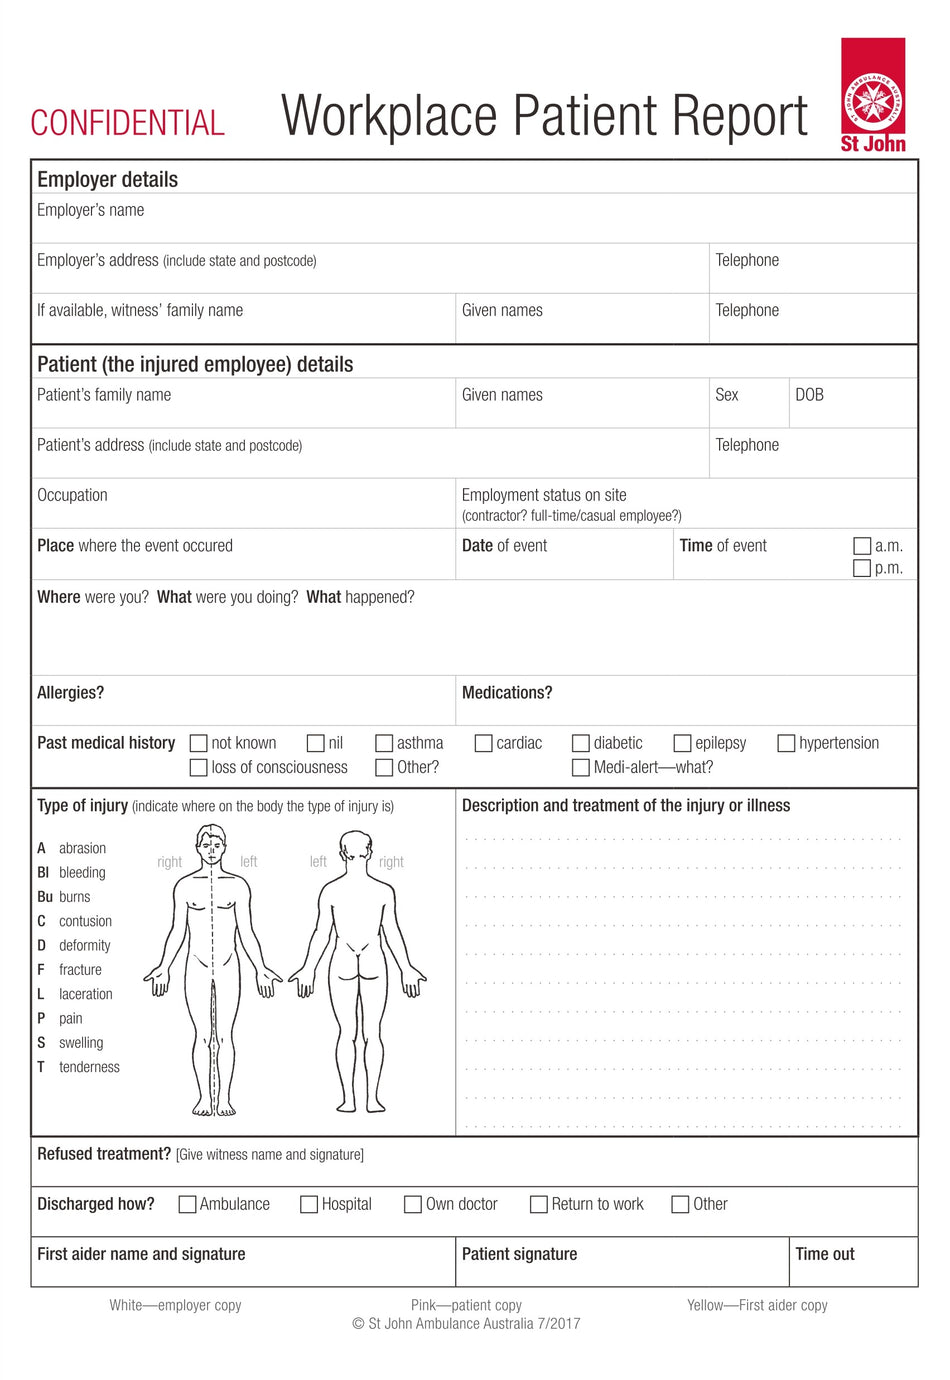 Workplace Patient Report A5 Forms- 10 pack (1 book)